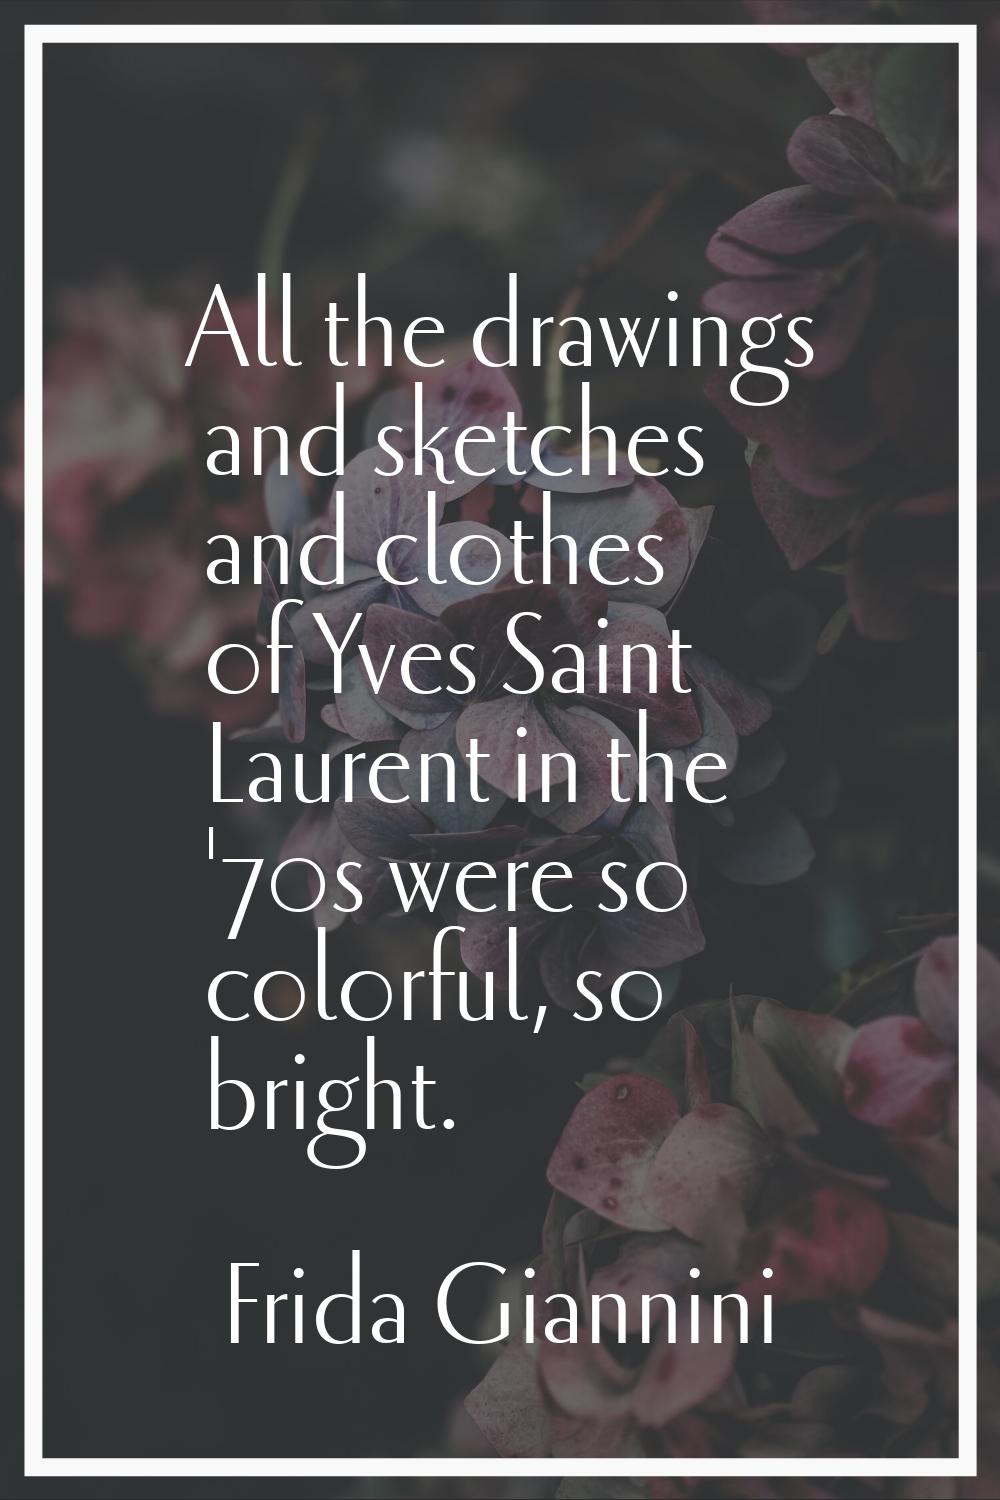 All the drawings and sketches and clothes of Yves Saint Laurent in the '70s were so colorful, so br